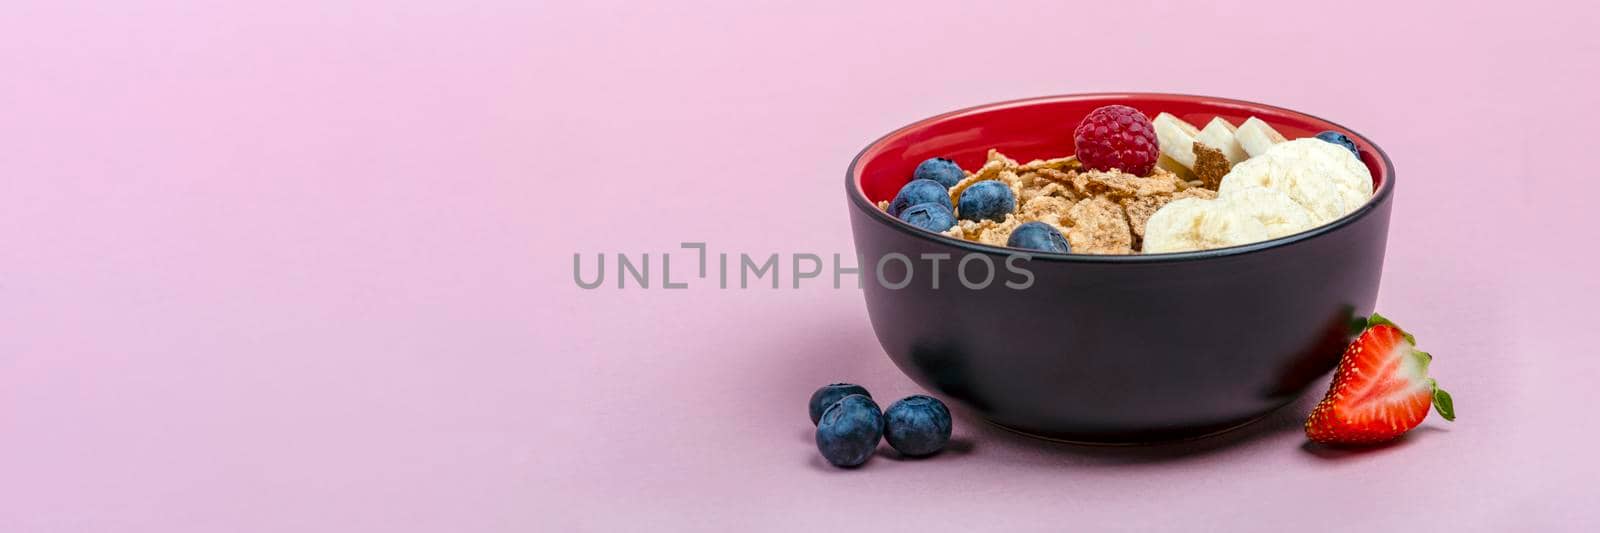 Muesli. Breakfast, healthy food and diet. Muesli with fruits in a plate on a pink background. Blueberries, strawberries and raspberries on a background of muesli flakes. Print banner with copy space.